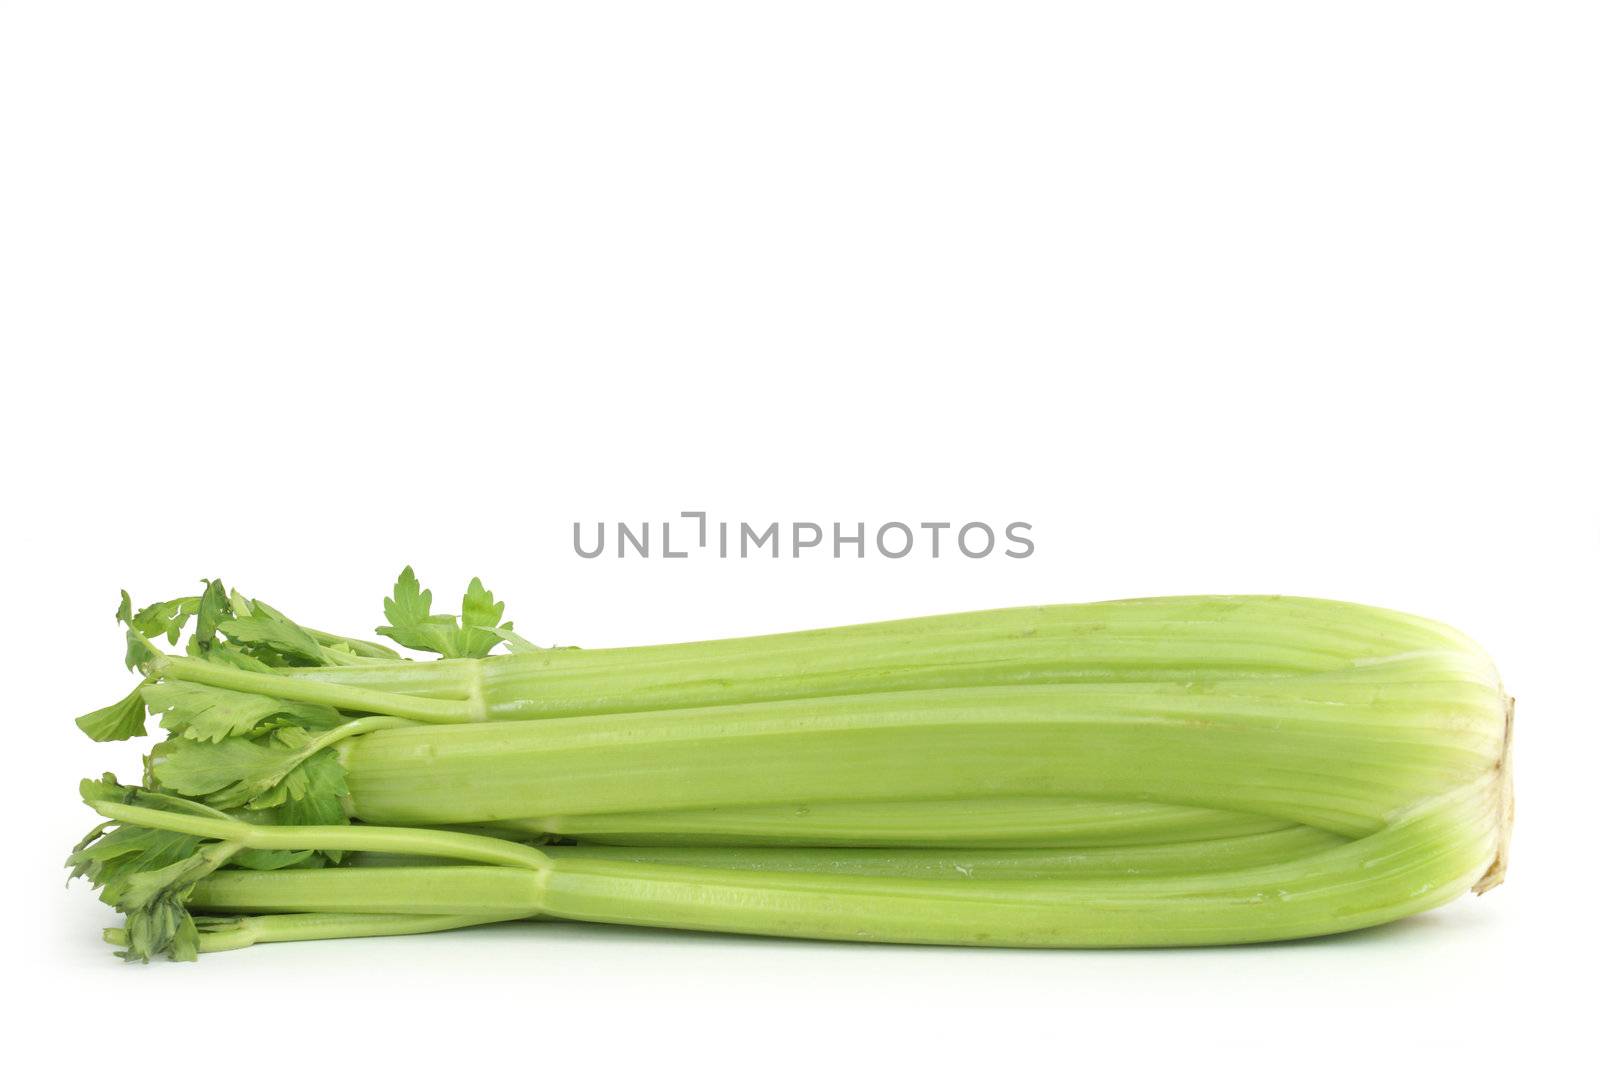 A stock of ripe celery on white background.